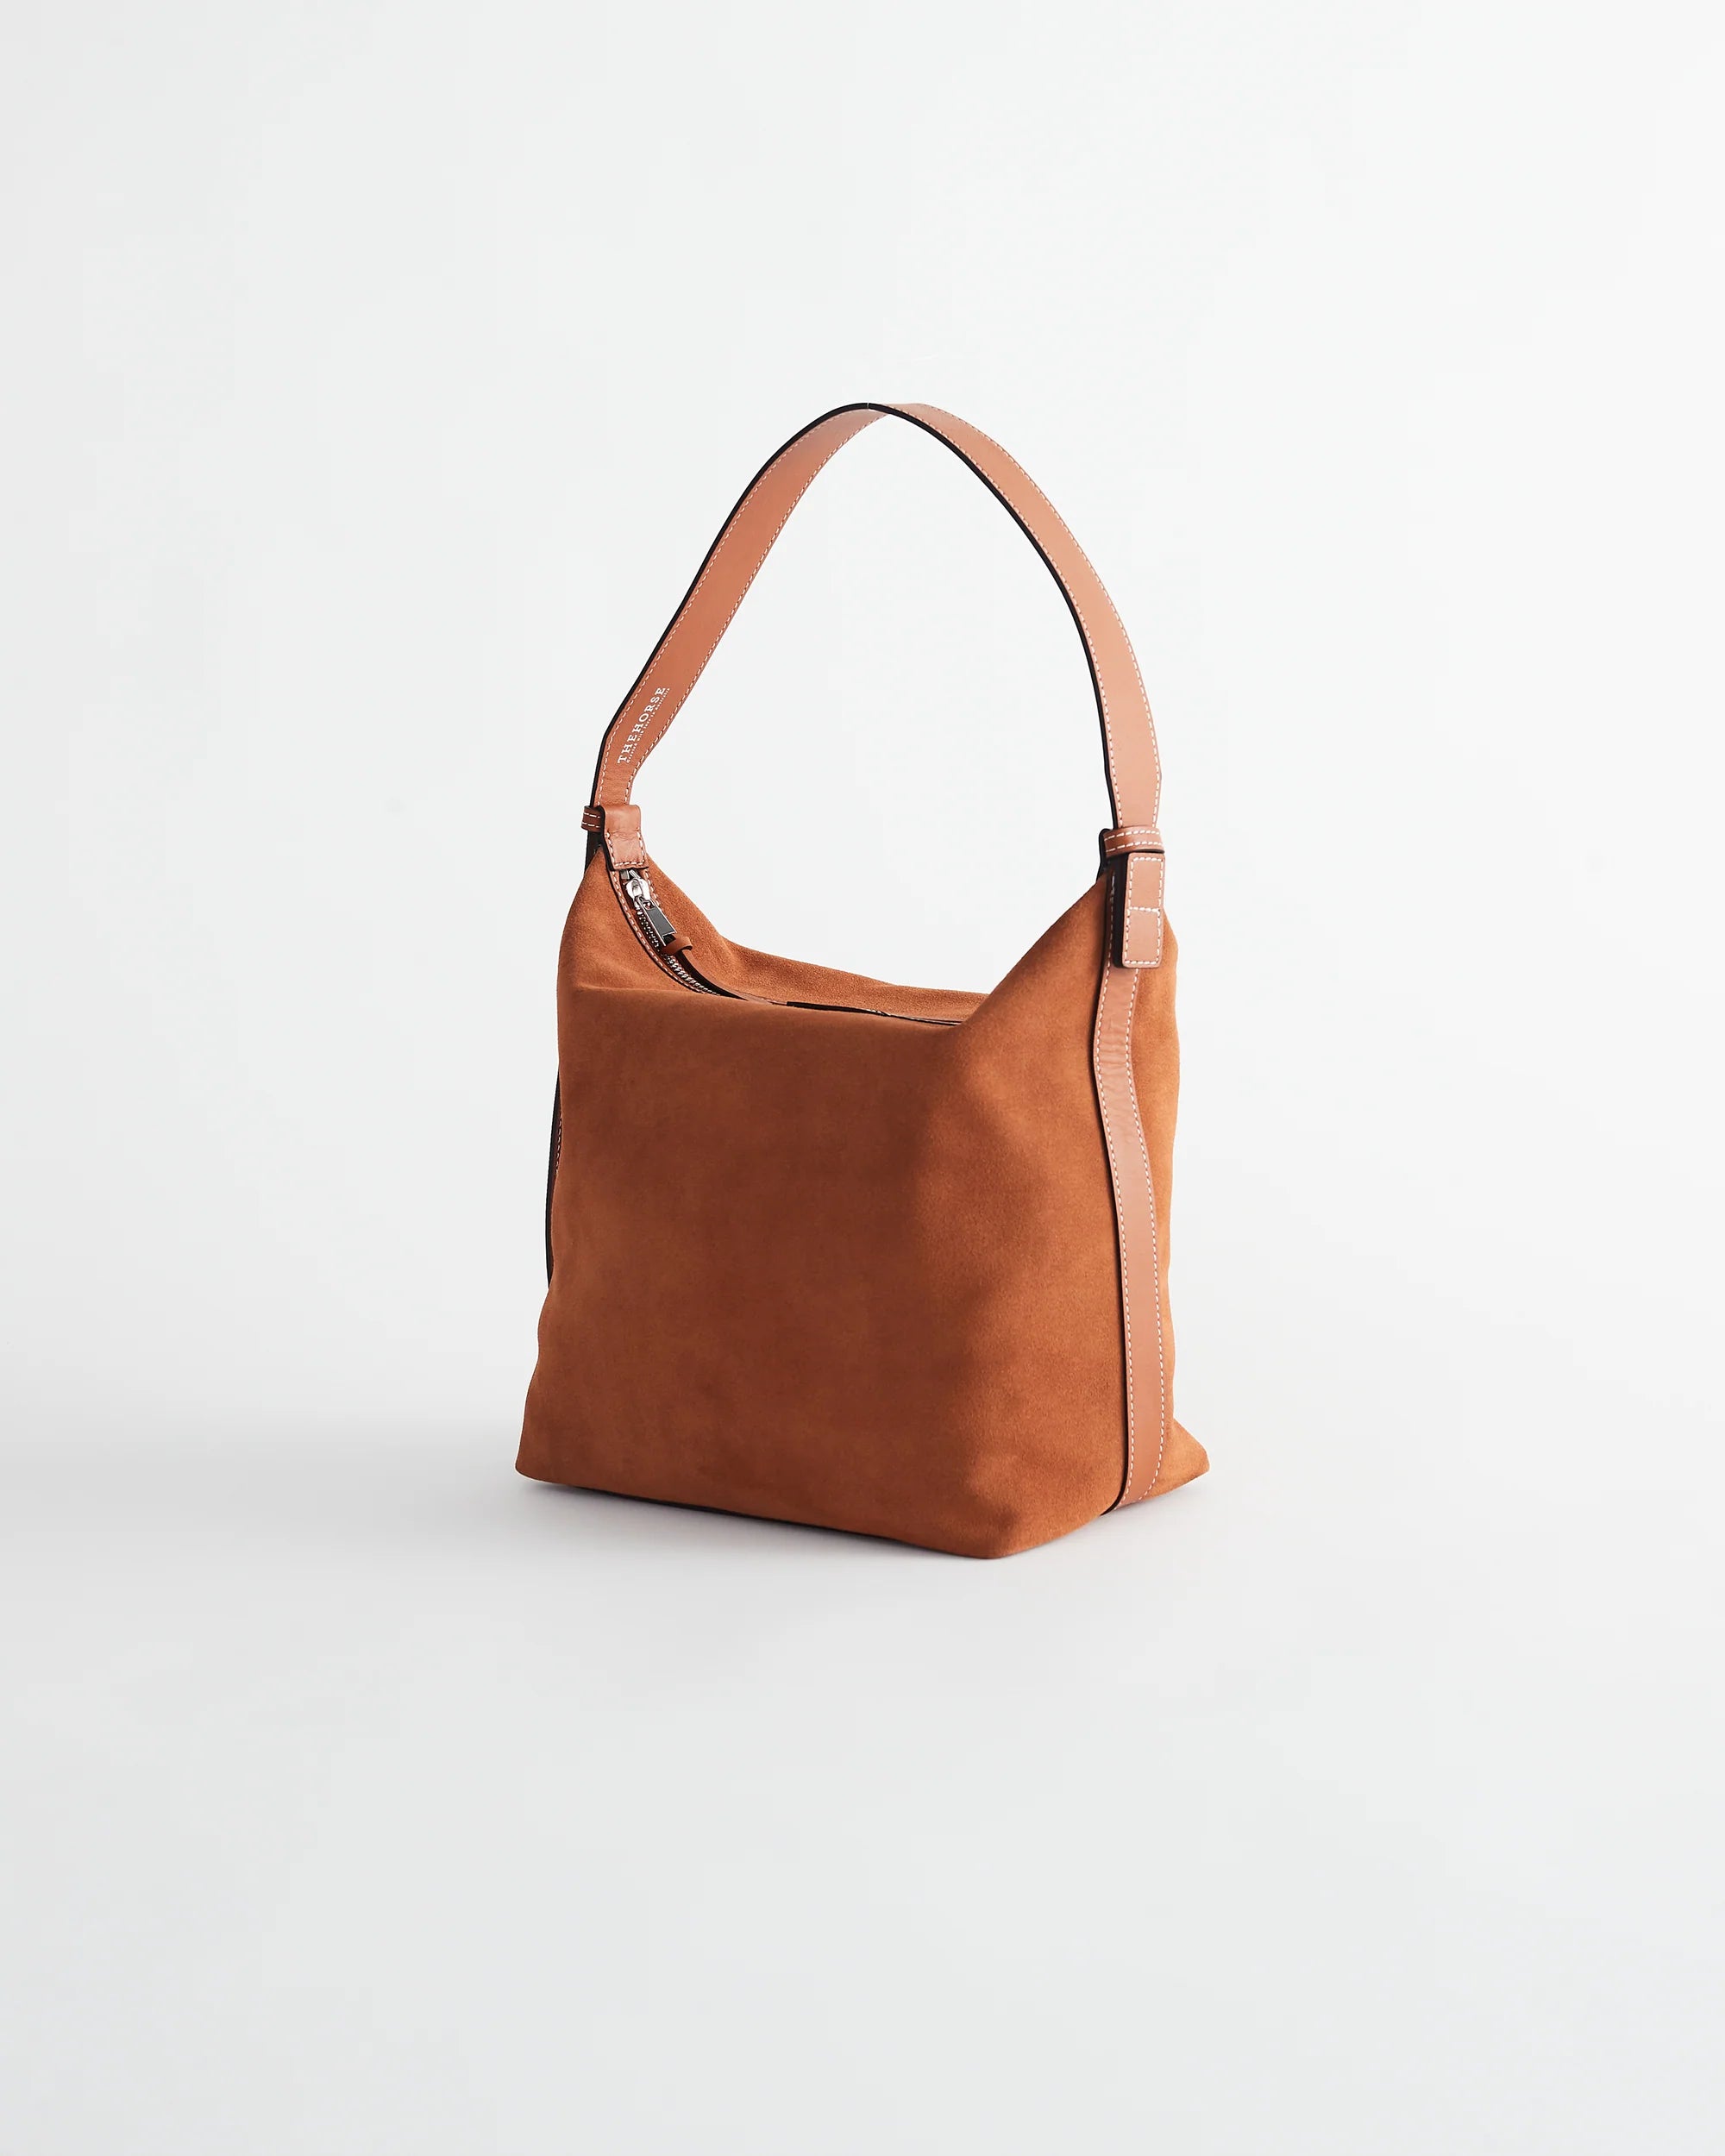 THE HORSE | DAISY SUEDE BAG